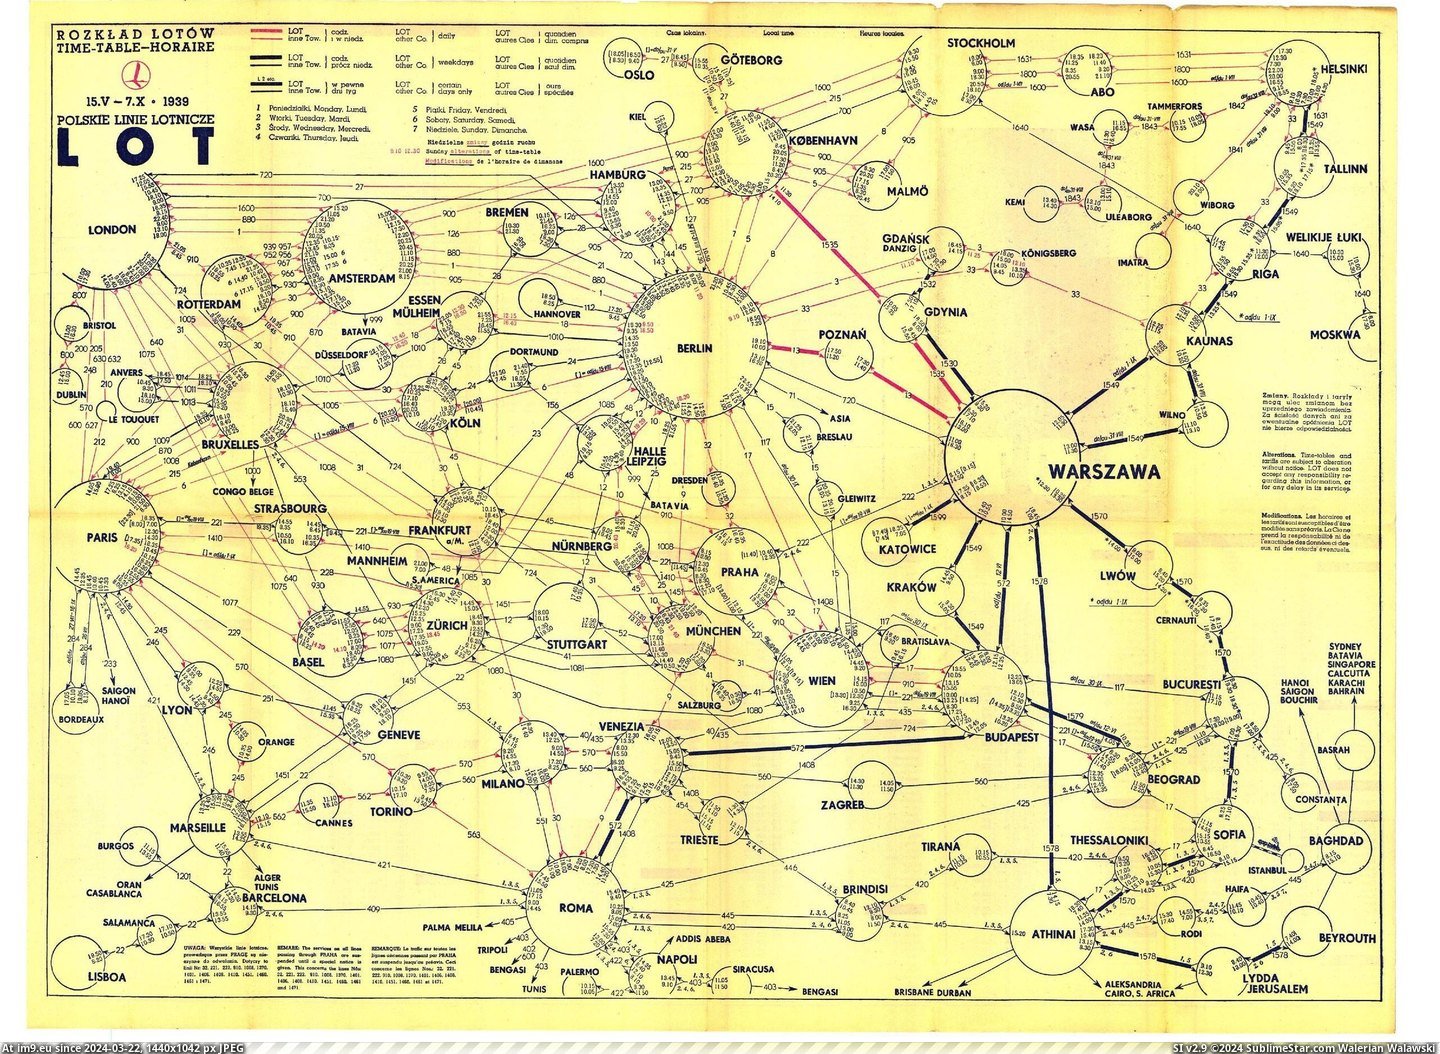 #World #Map #Months #Routes #Airlines #Lot #Polish #War [Mapporn] Map of routes of LOT Polish Airlines in last months before World War II [3662x2667] Pic. (Obraz z album My r/MAPS favs))